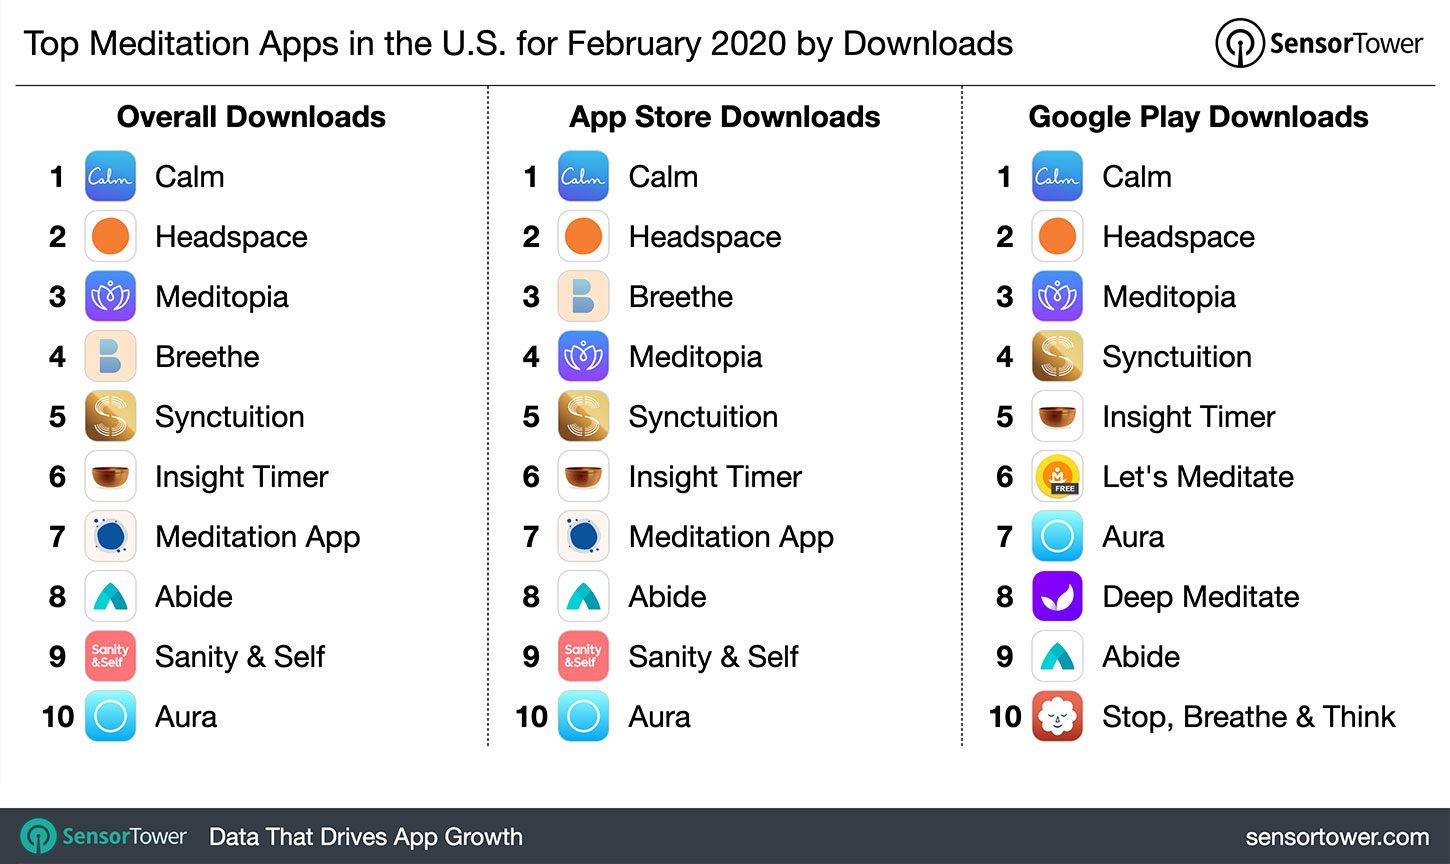 Top Meditation Apps in the U.S. for February 2020 by Downloads